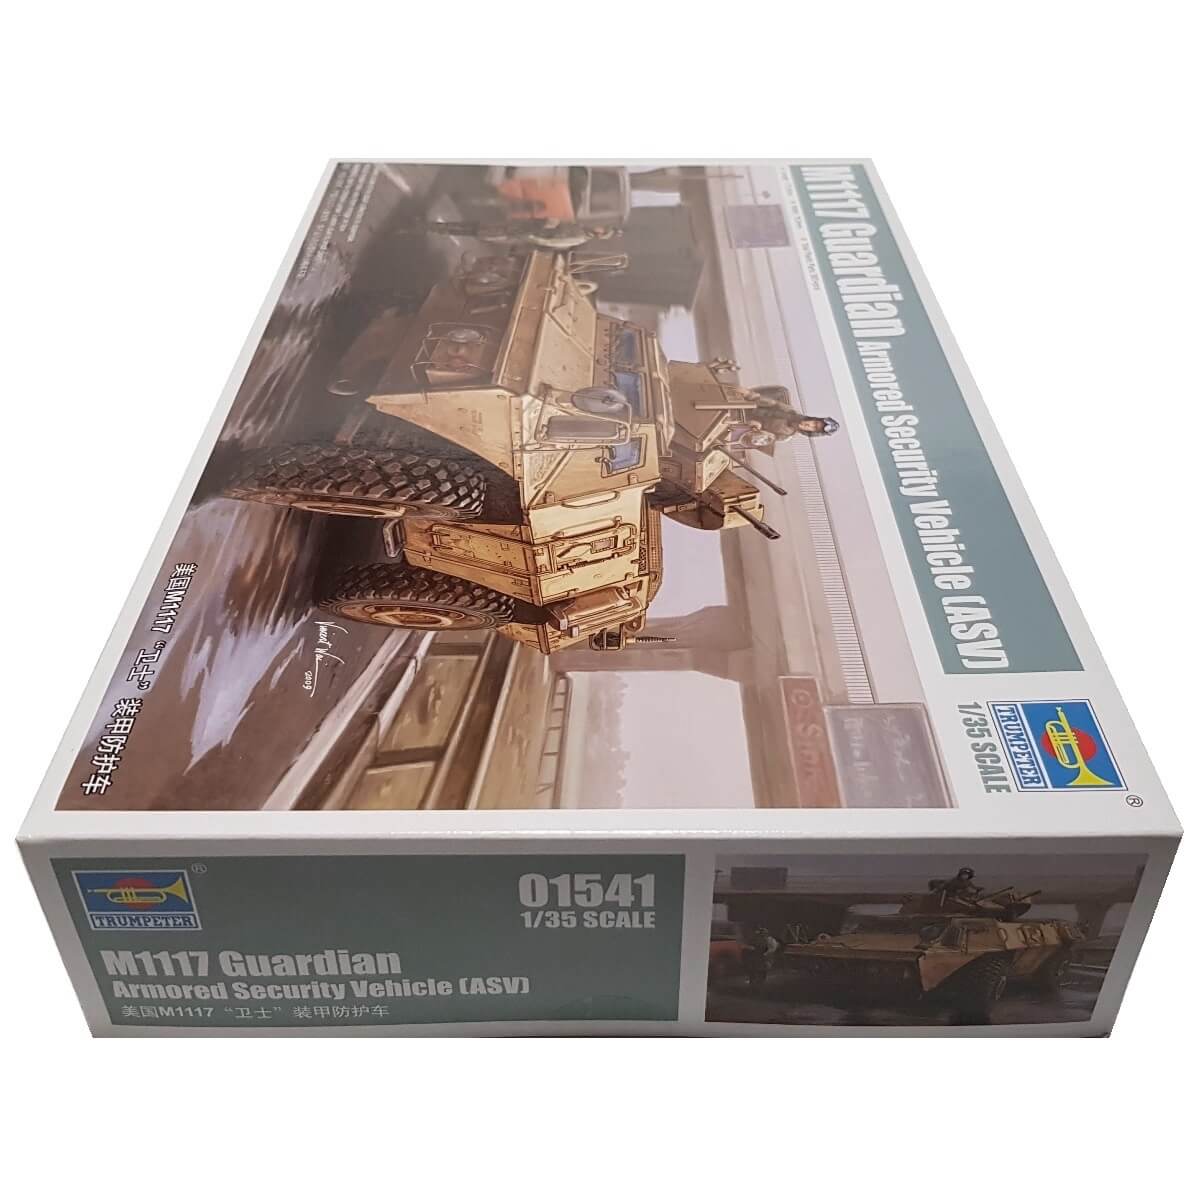 1:35 M1117 Guardian Armored Security Vehicle (ASV) - TRUMPETER